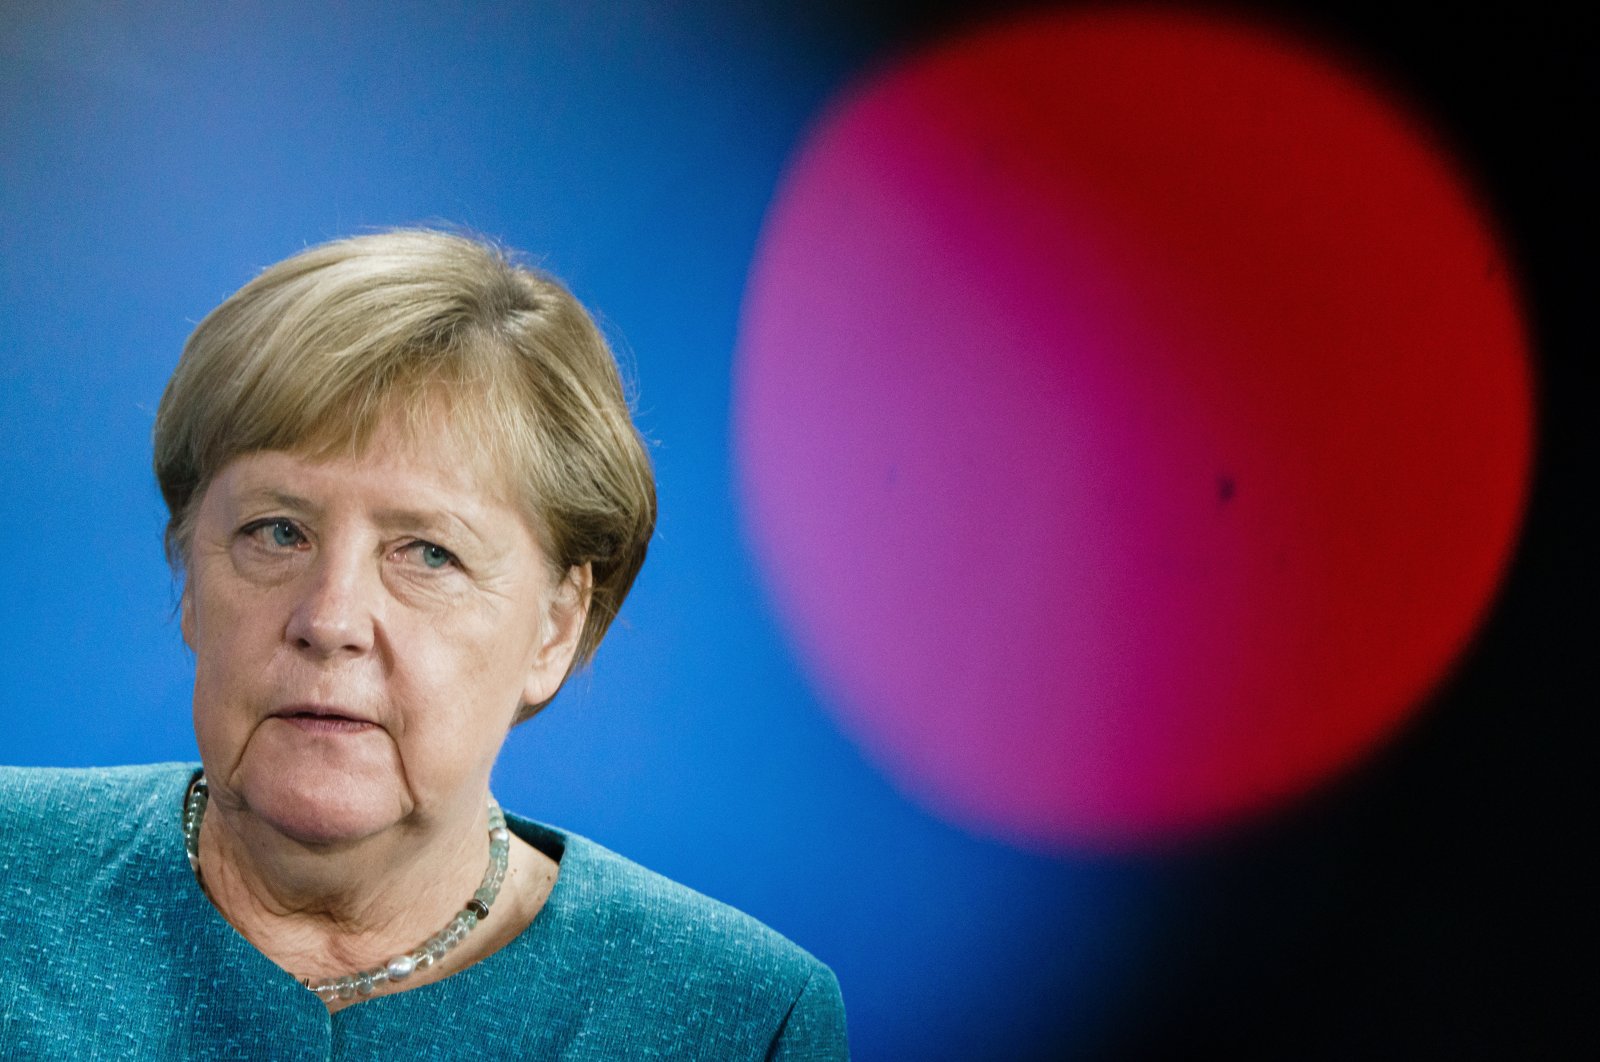 German Chancellor Angela Merkel looks on behind the red light of a TV camera during a joint press conference with Austrian Chancellor Kurz in Berlin, Germany, Aug. 31, 2021. (EPA Photo)